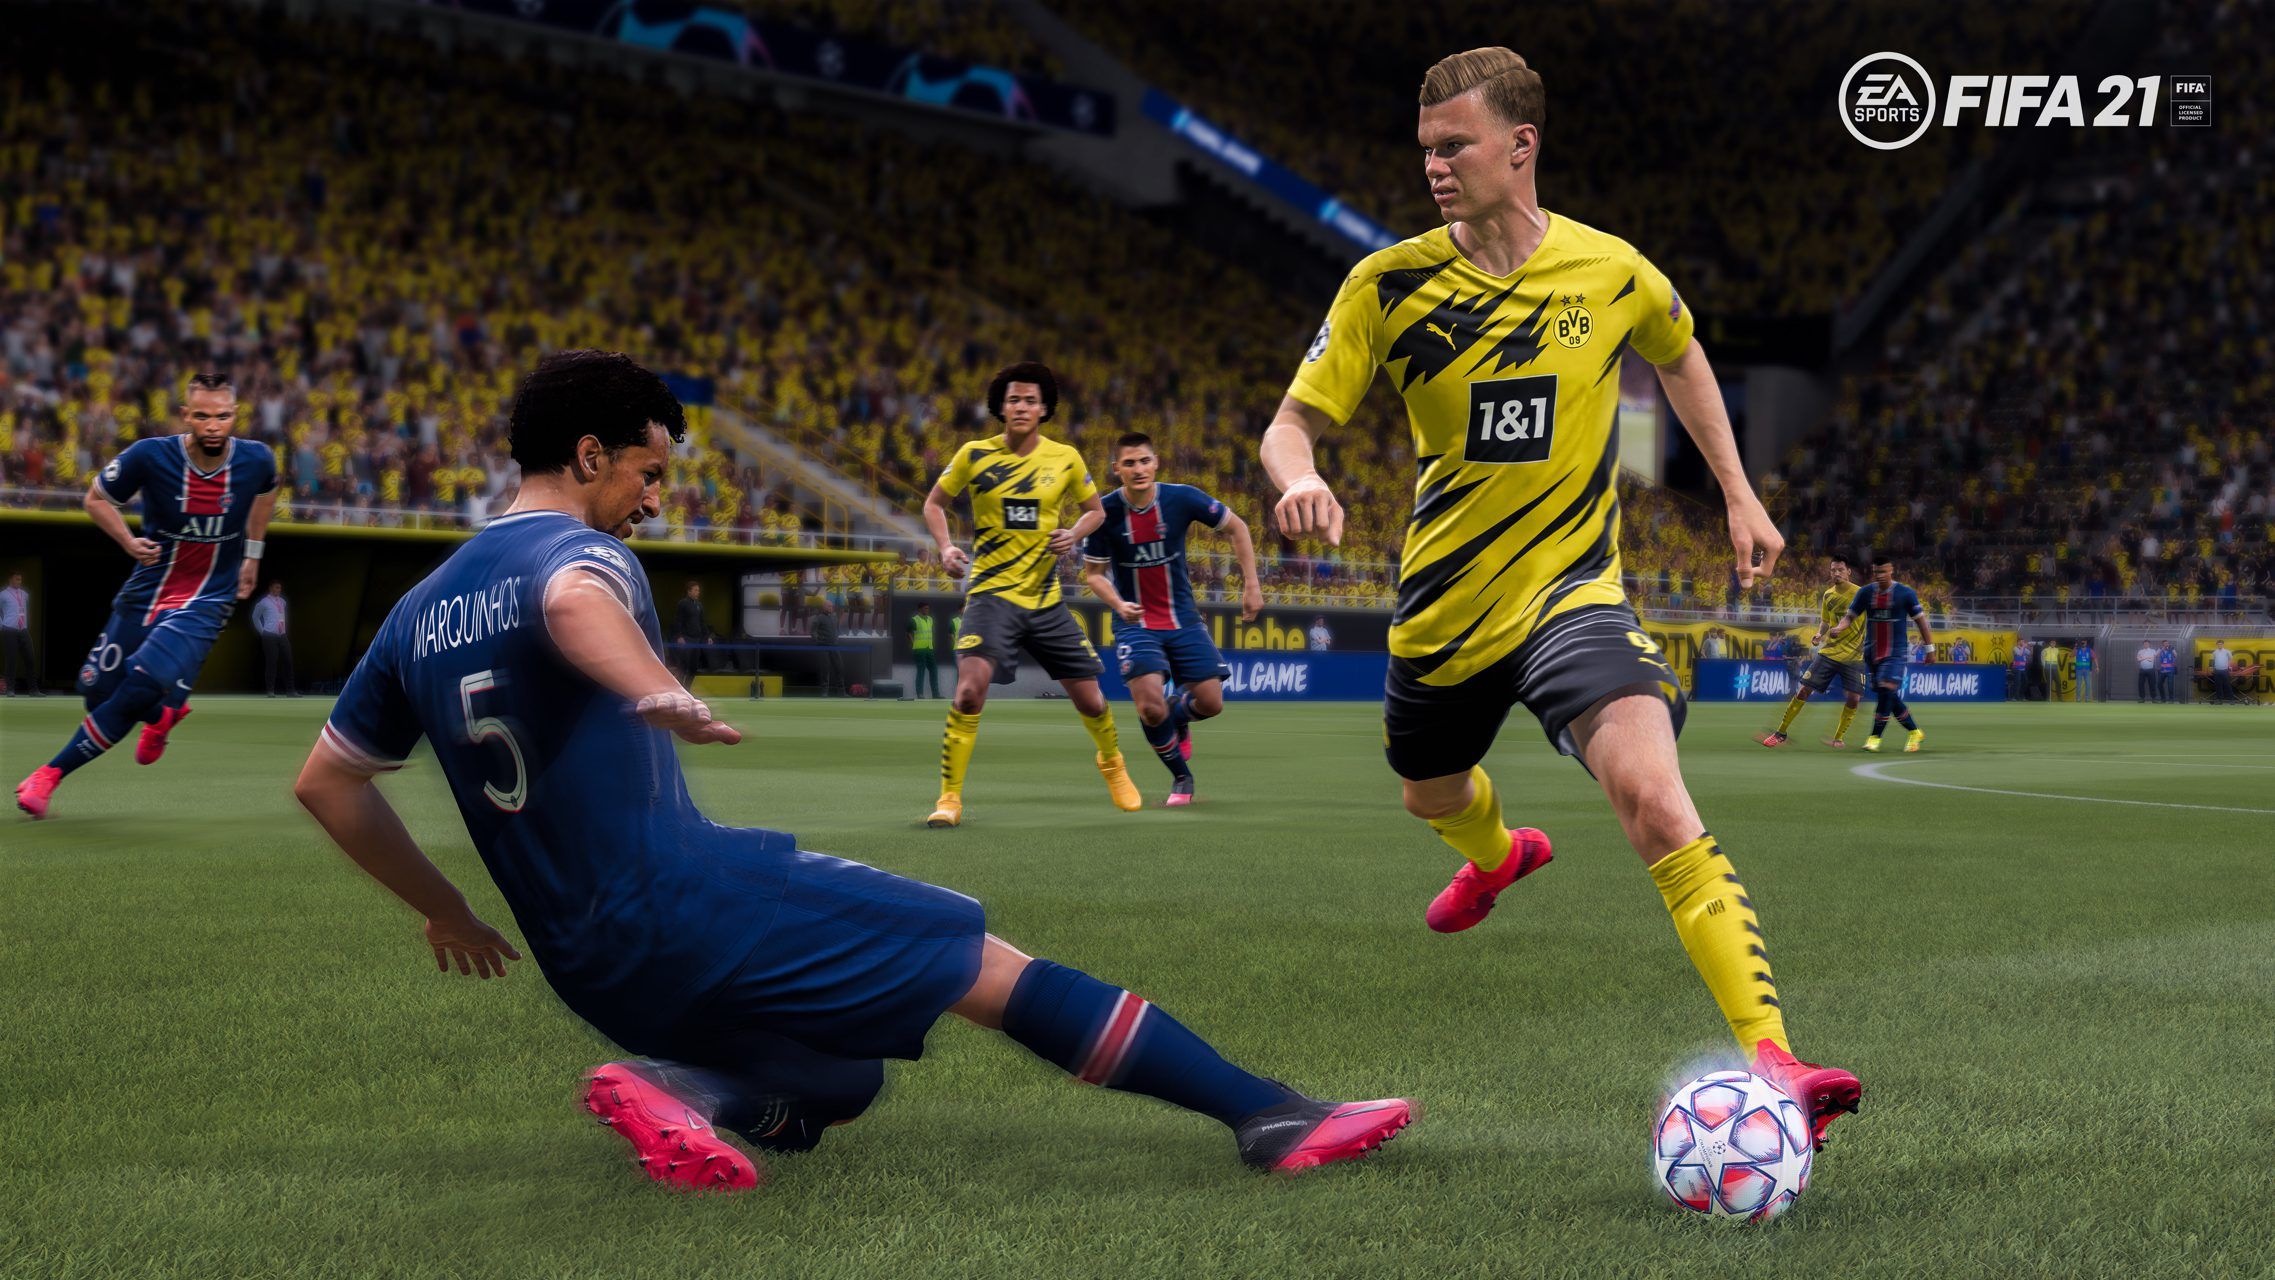 Is FIFA 21 Worth Buying? Here Are 5 Subtle But Important Changes You Need to Know